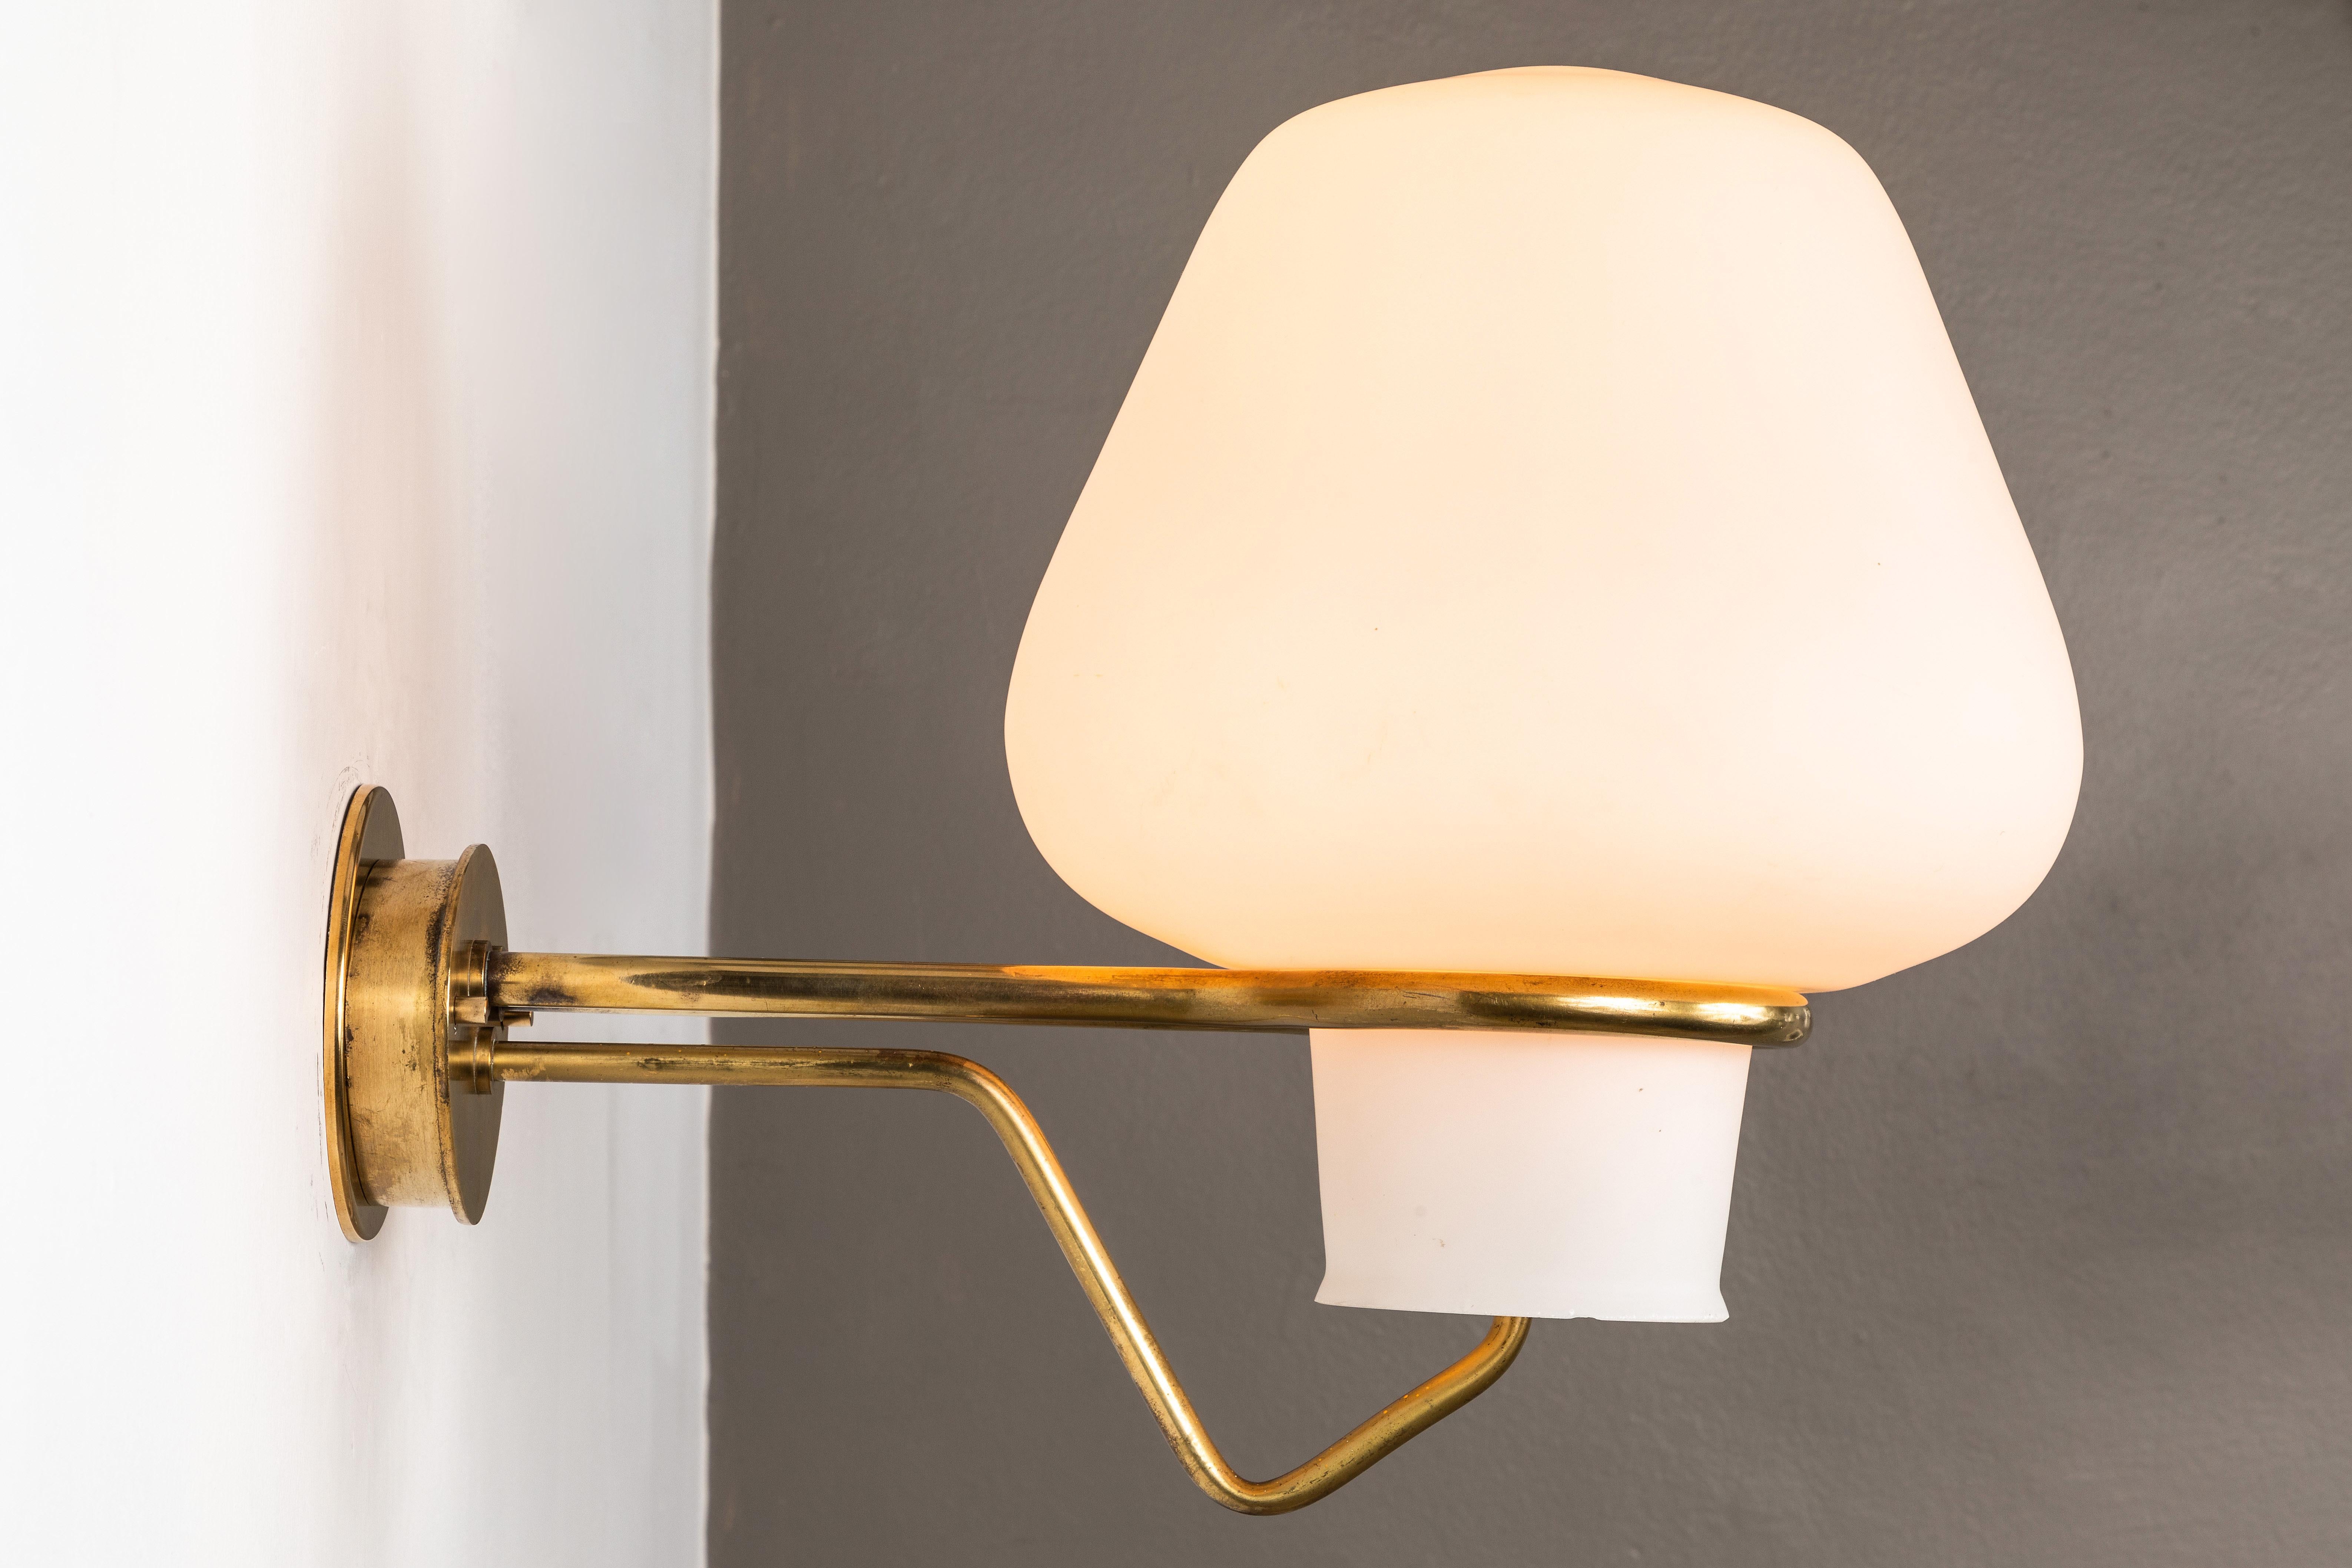 Large 1950s Gunnar Asplund JH-813 brass and glass sconce for ASEA. Executed in brass and opaline glass. A uniquely architectural and rare Swedish lamp that when illuminated casts a warm and beautiful glow.

Professionally rewired by UL authorized